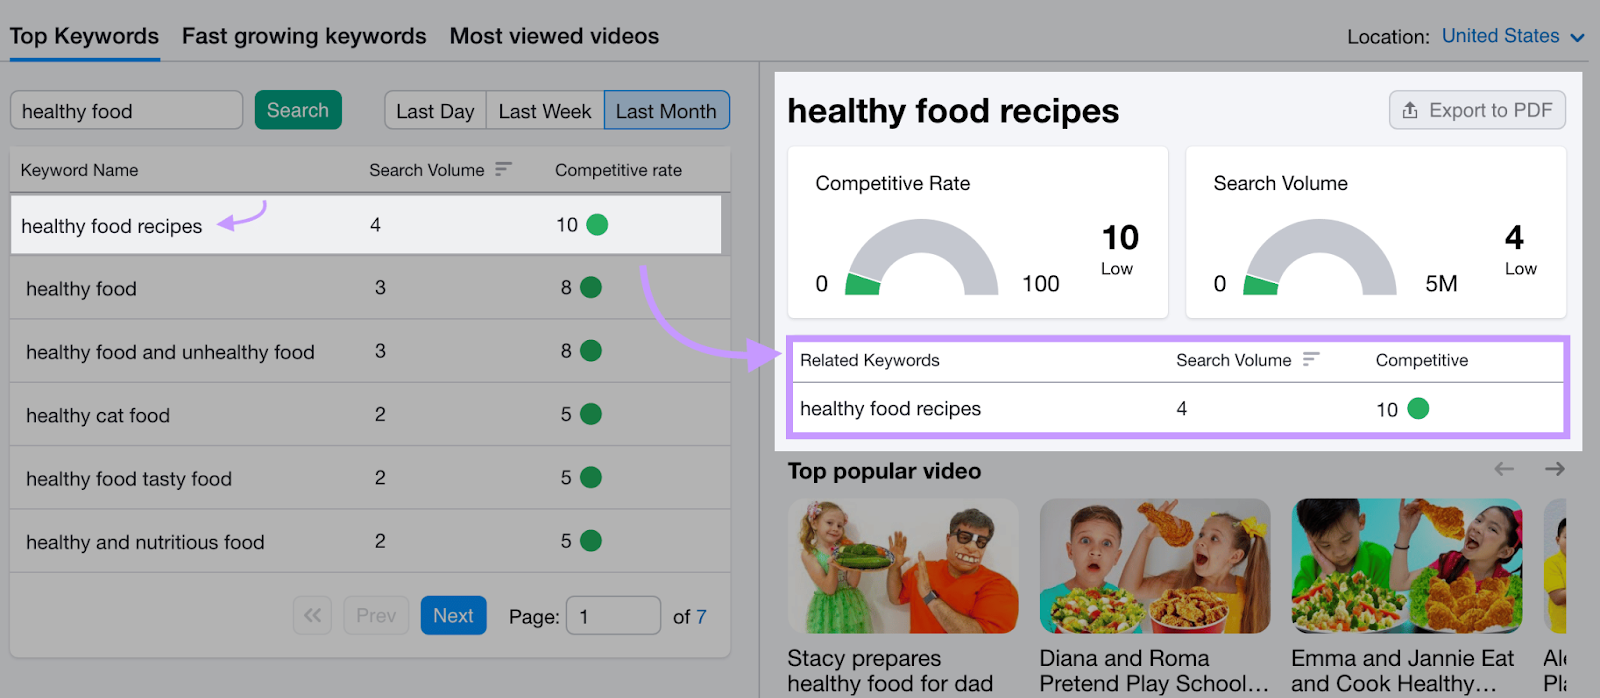 "healthy food recipes" result details in Keyword Analytics for YouTube